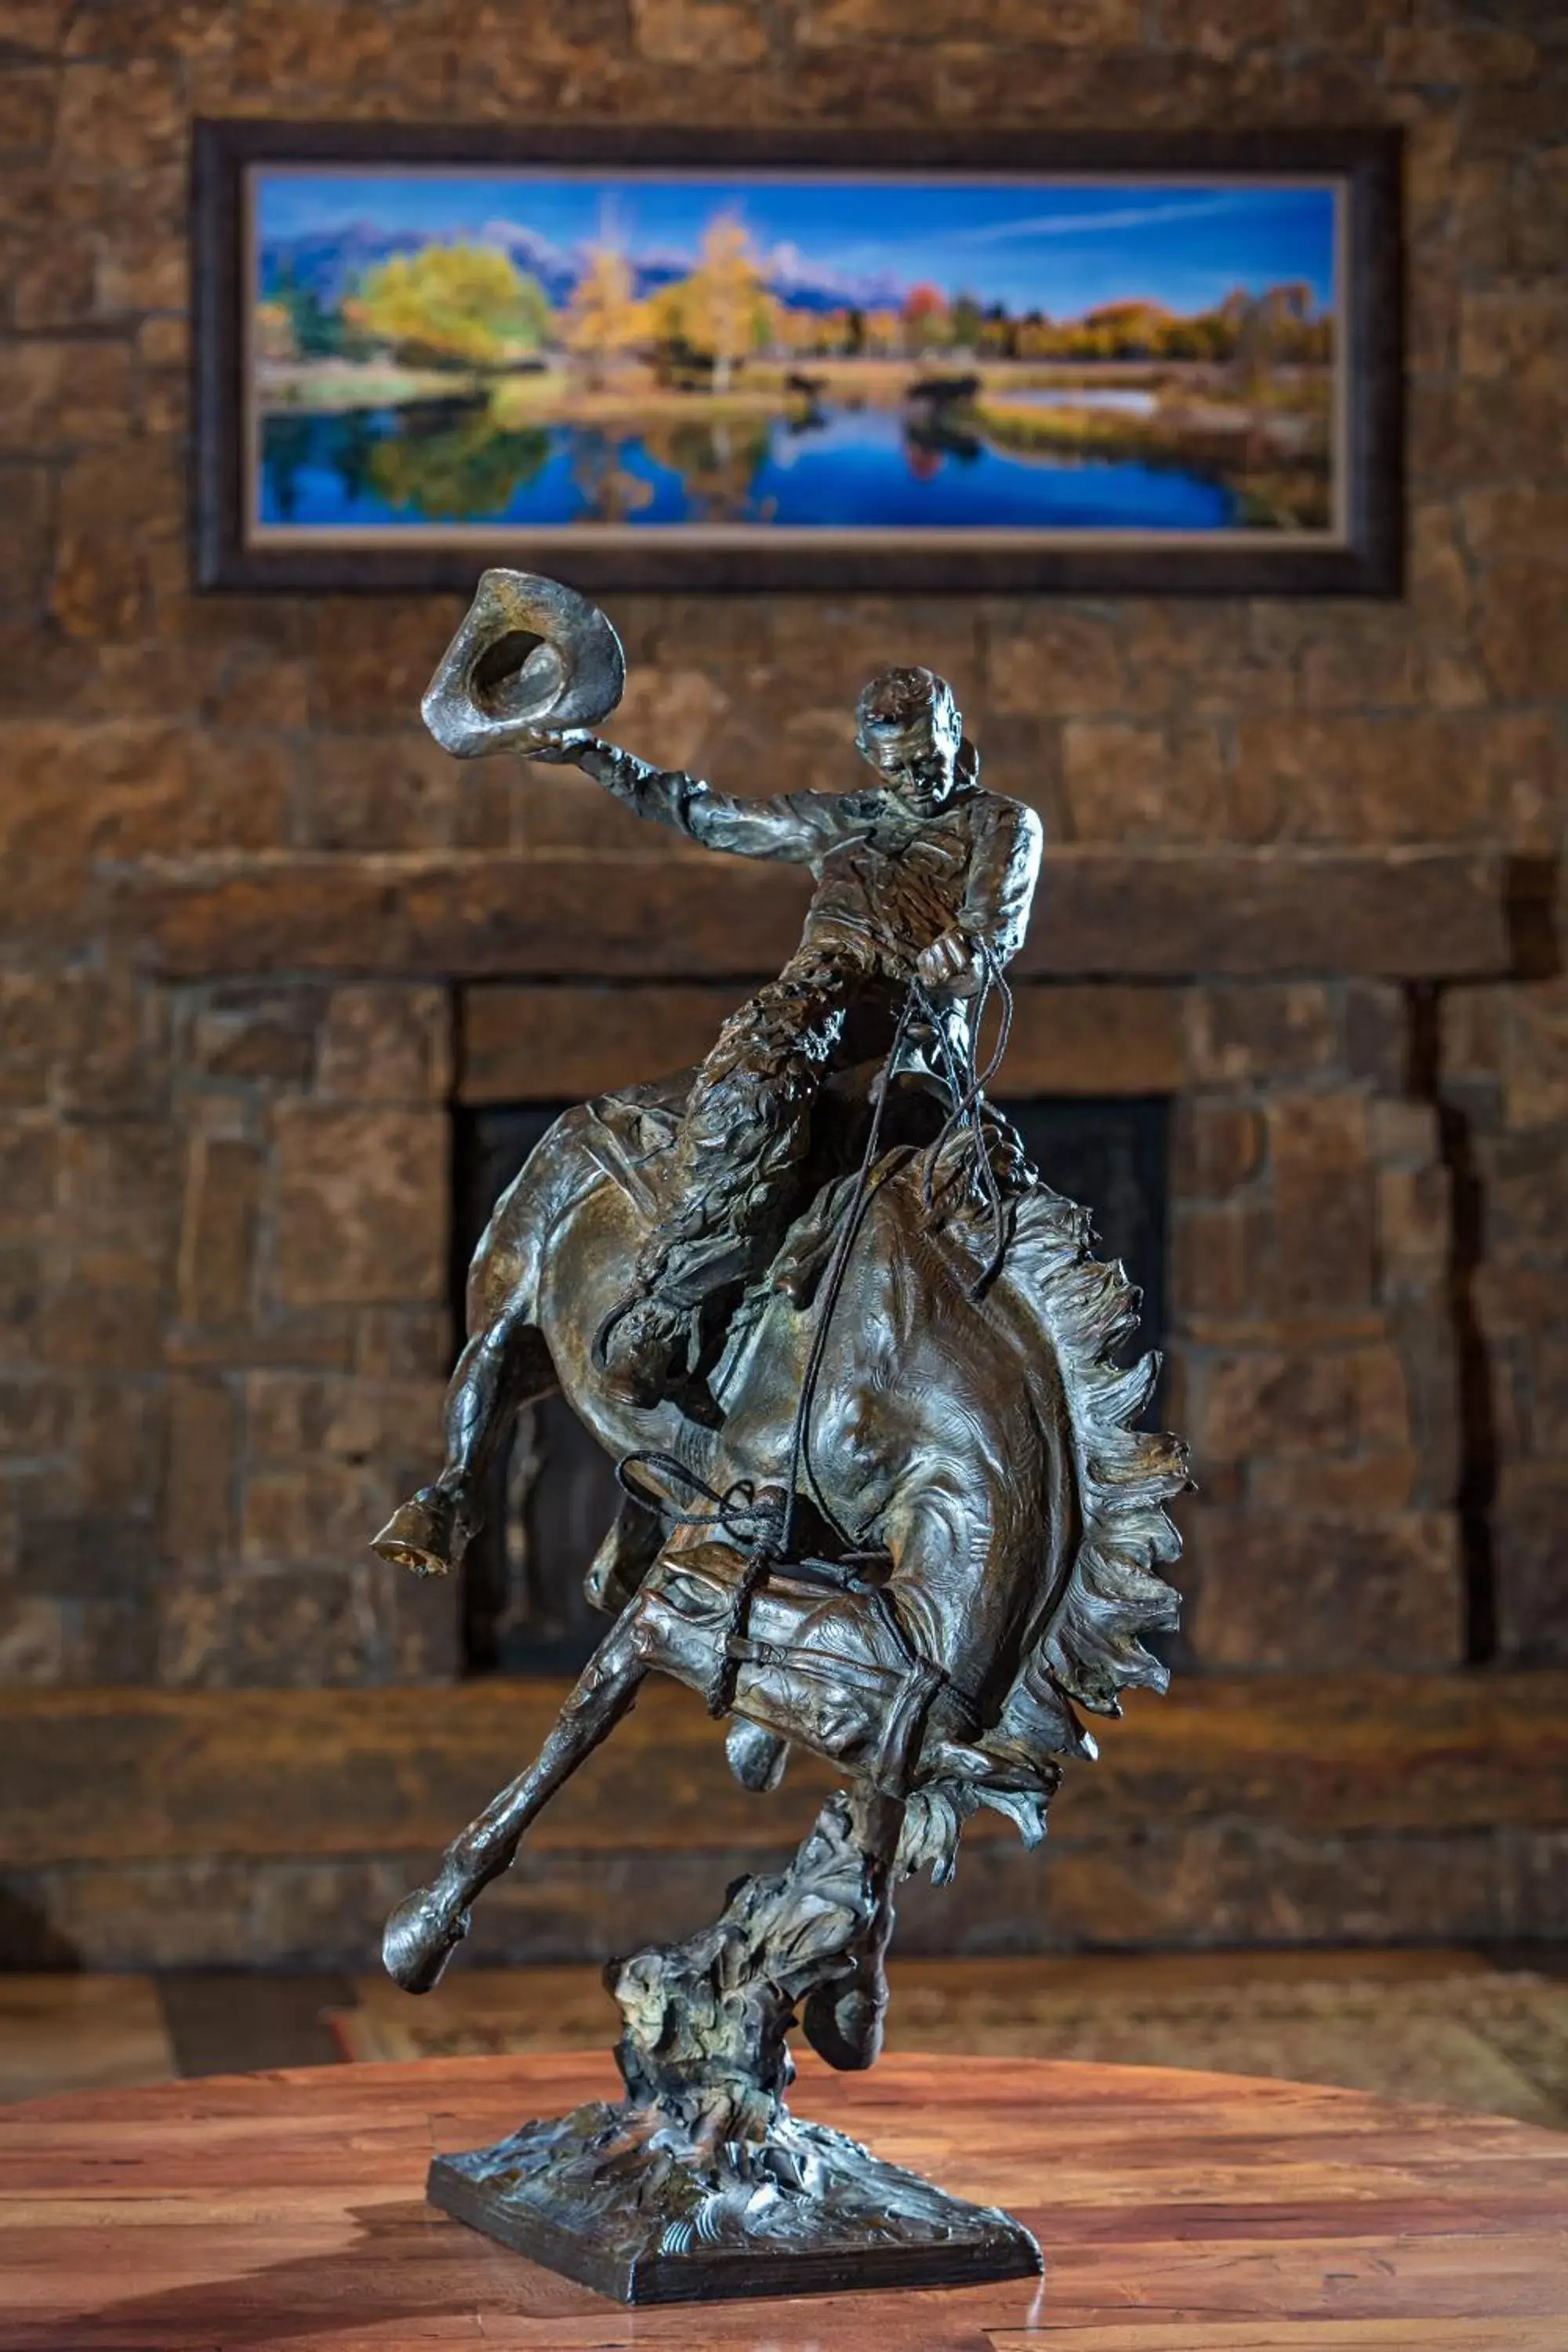 Decorative detail in Wyoming Inn of Jackson Hole